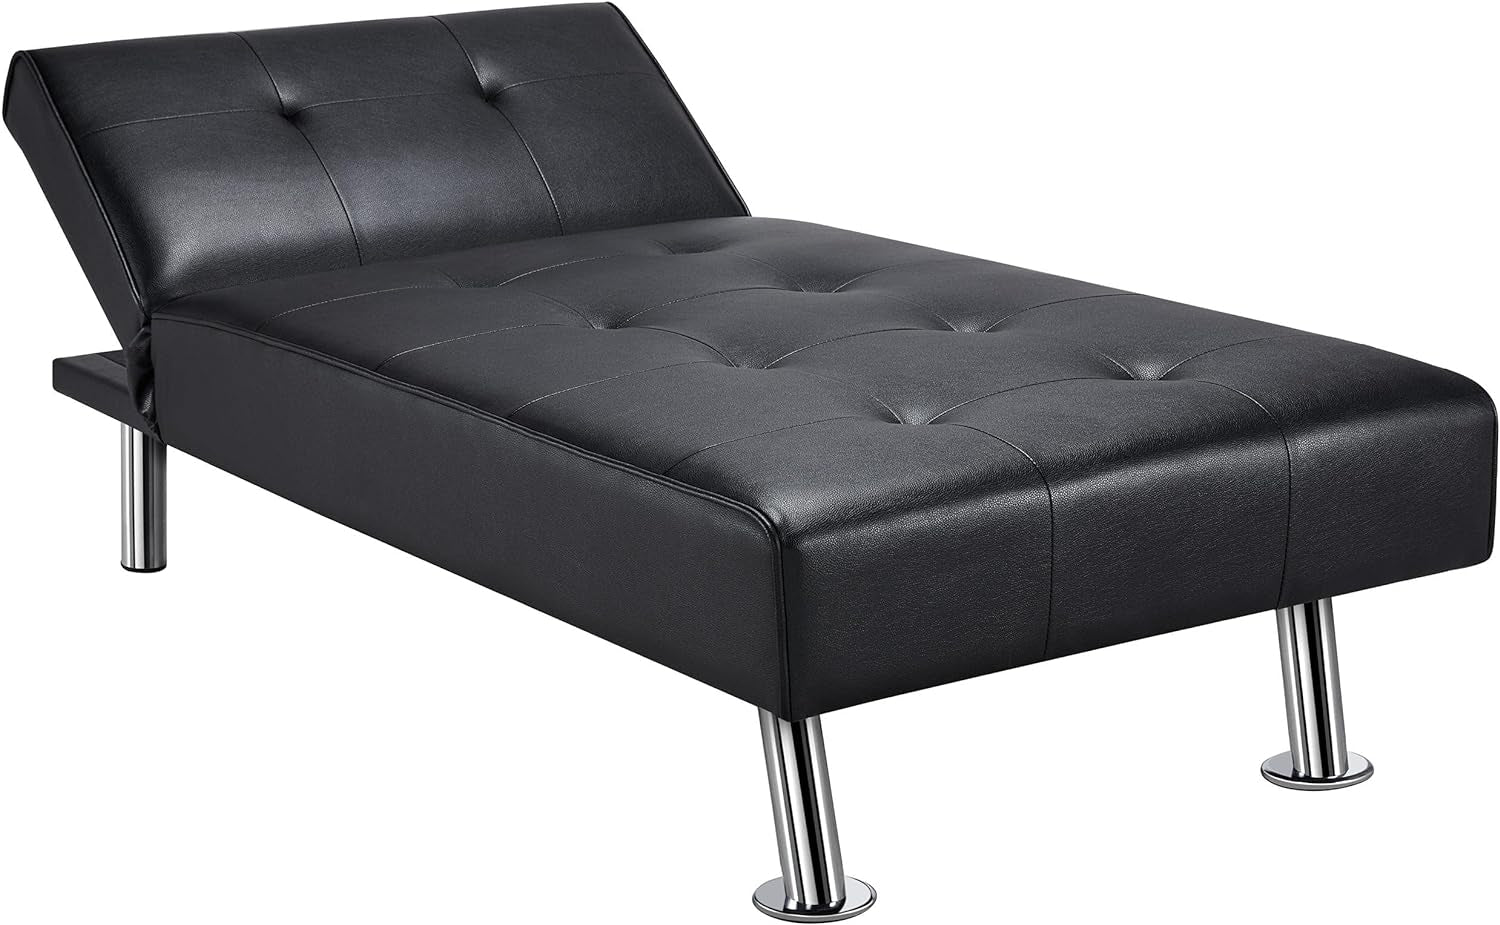 Faux Leather Sofa Bed Sleeper Convertible Futon Sofa Modern Recliner Couch Daybed with Chrome Metal Legs for Living Room Black